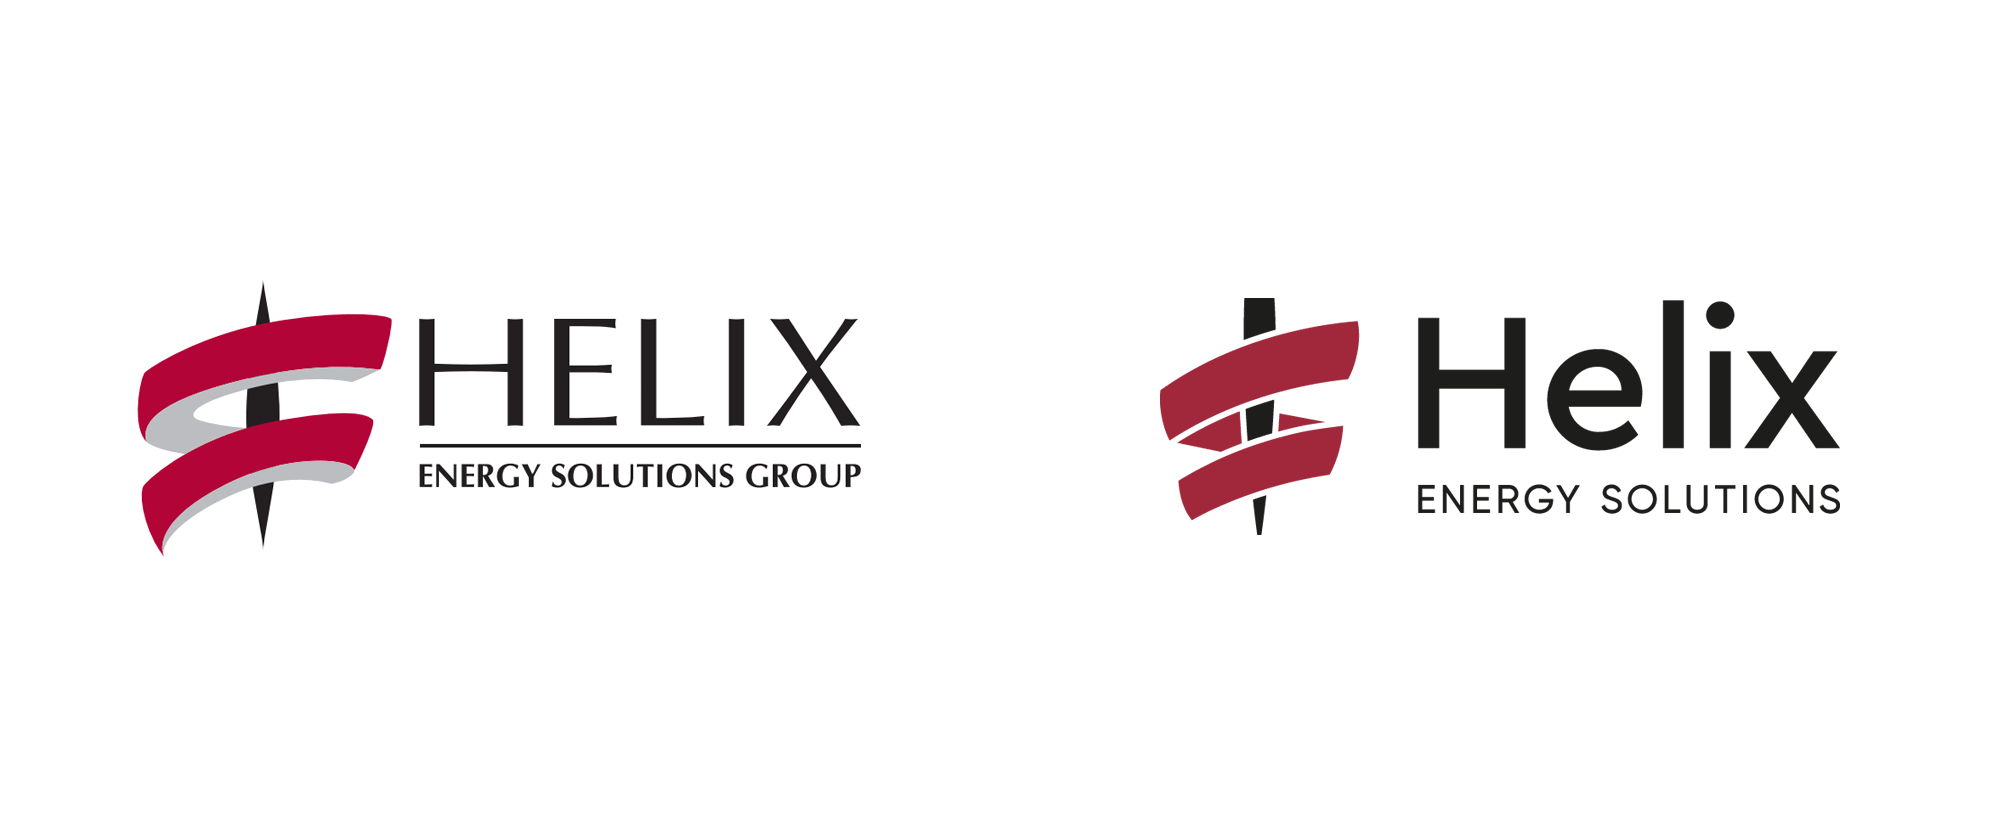 New Logo and Identity for Helix Energy Solutions by Design and Code